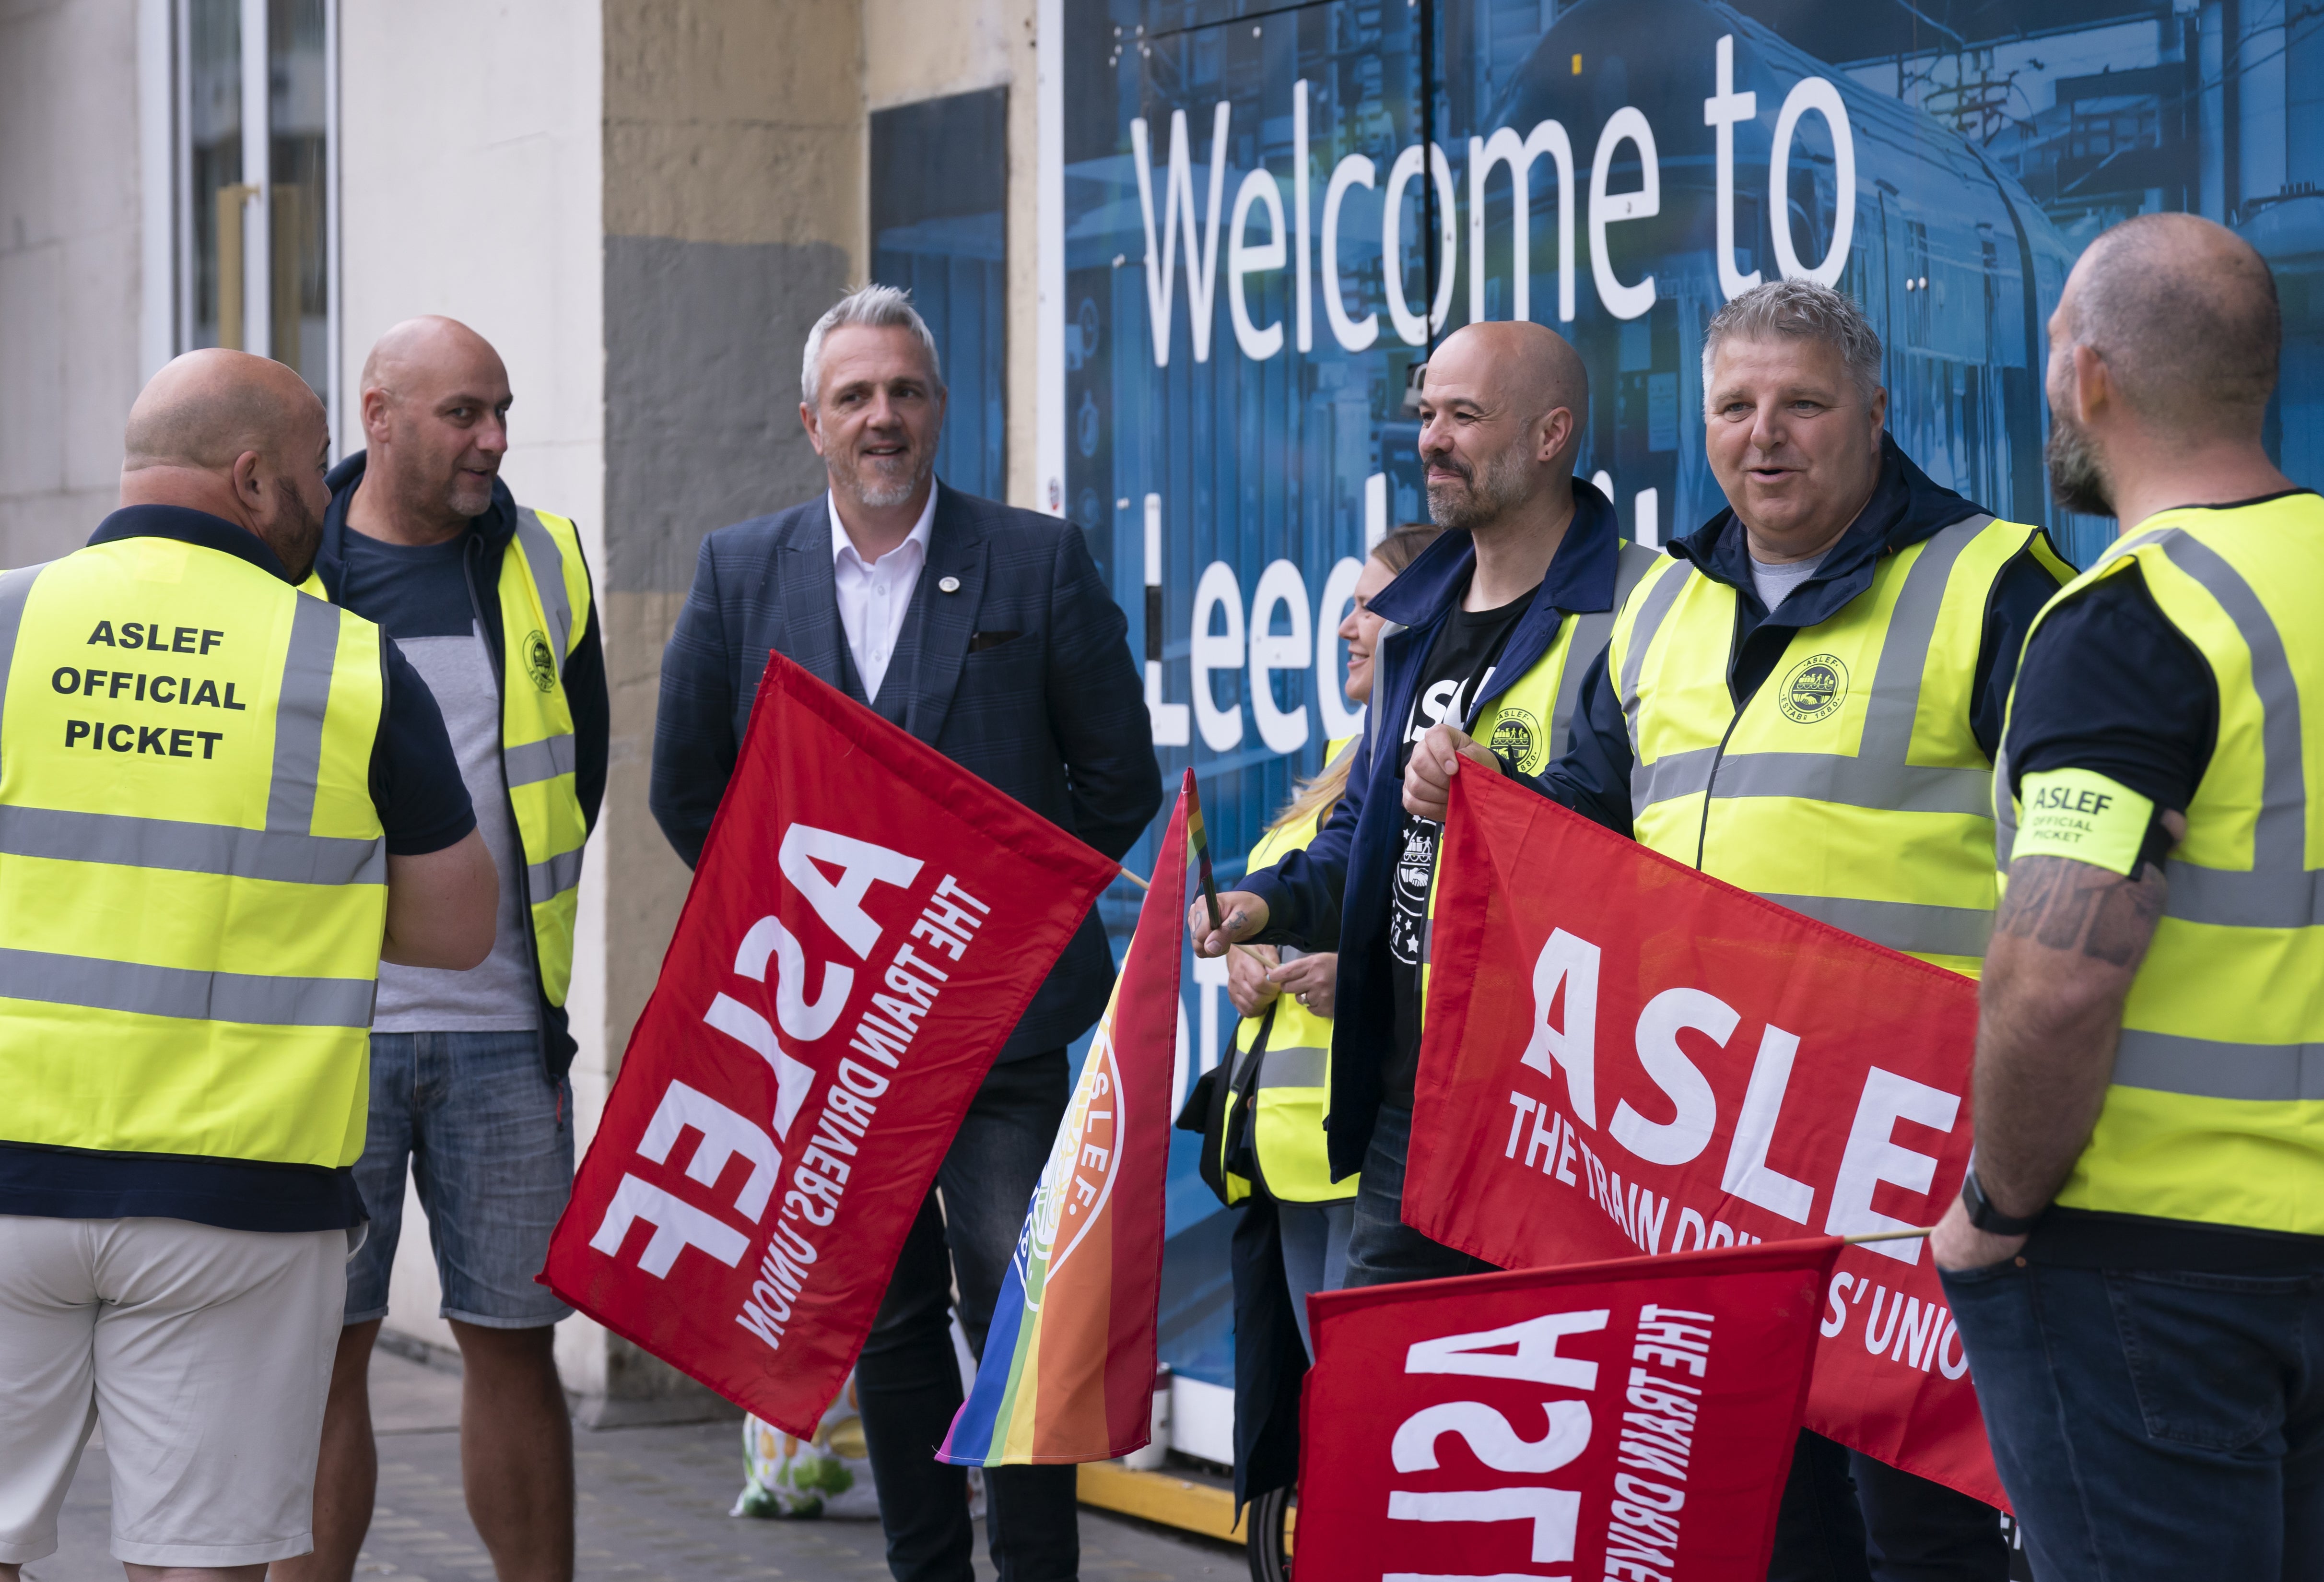 Protesters on the picket line outside Leeds railway station (Danny Lawson/PA)